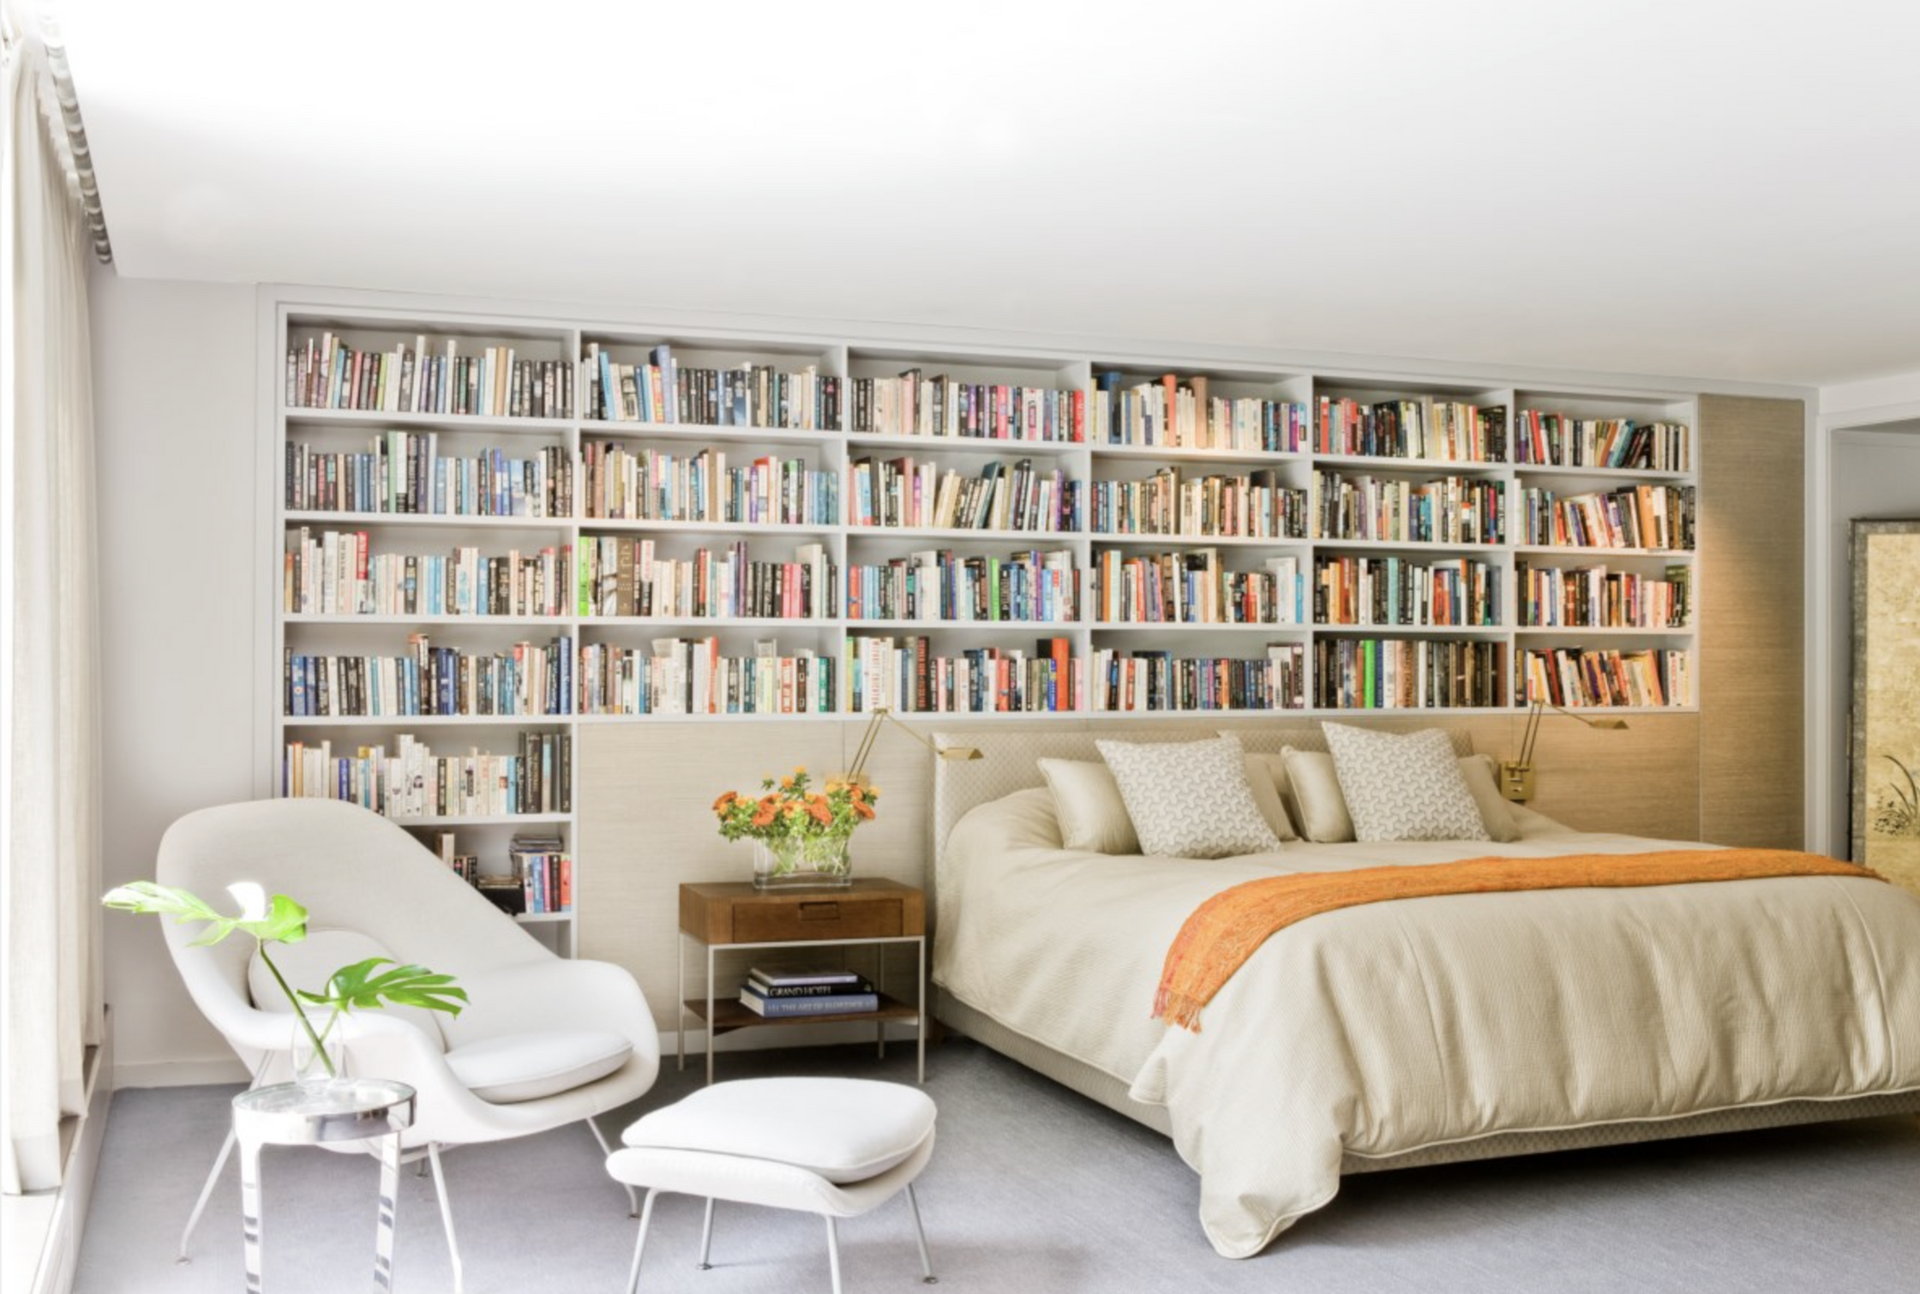 12 Bedrooms That Are Perfect for Book Lovers